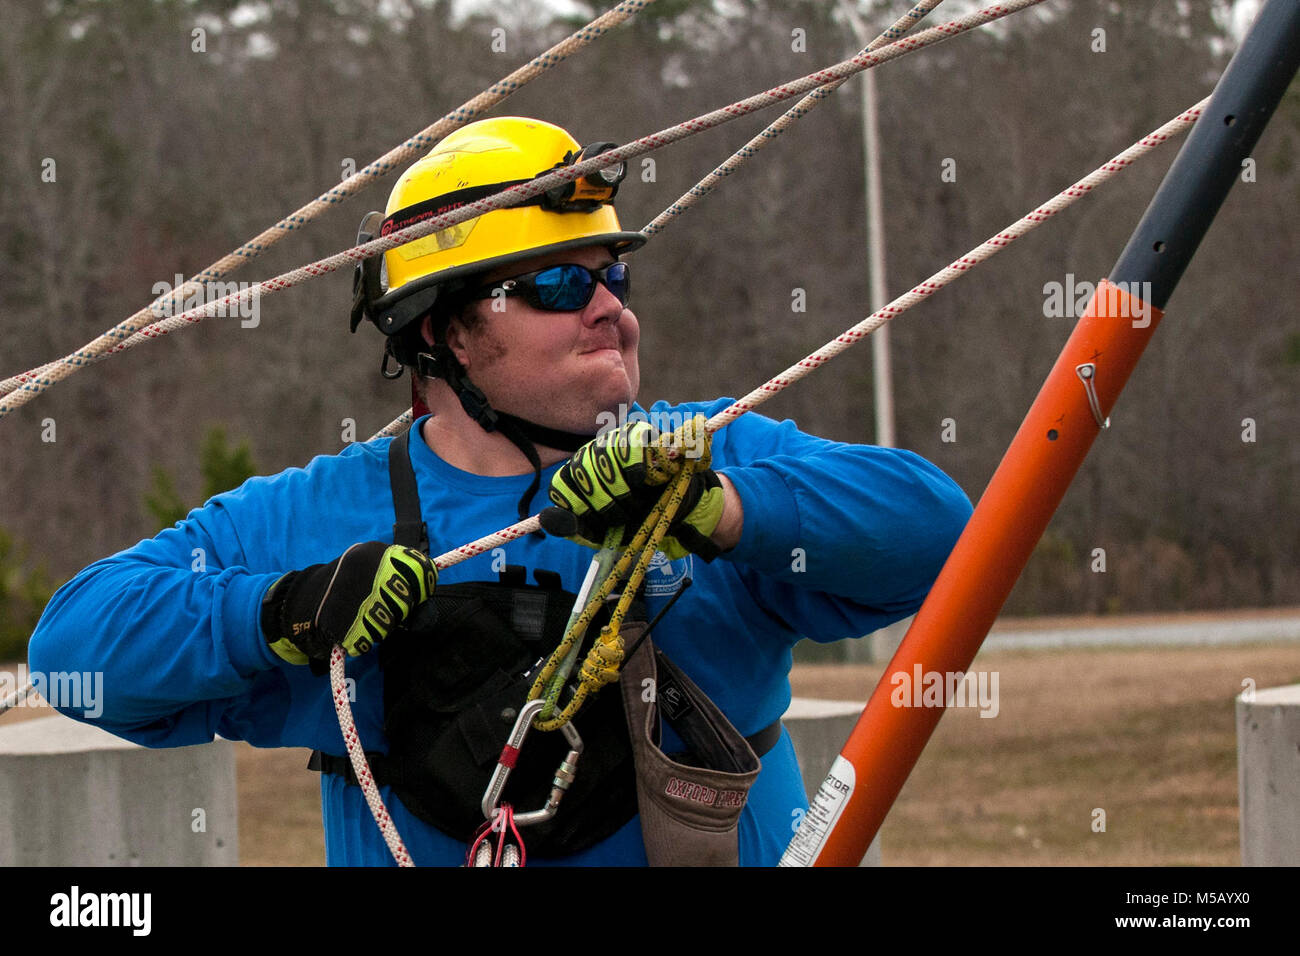 Members of the Mississippi Task Force Urban Search and Rescue Team simulate responding to victims in a collapsed structure during the PATRIOT South 2018 exercise at Camp Shelby, Miss., Feb. 14, 2018. PATRIOT South 2018 tests the combined abilities of the National Guard, along with state and local agencies, to respond during natural disasters using simulated emergency scenarios. (U.S. Air National Guard Stock Photo